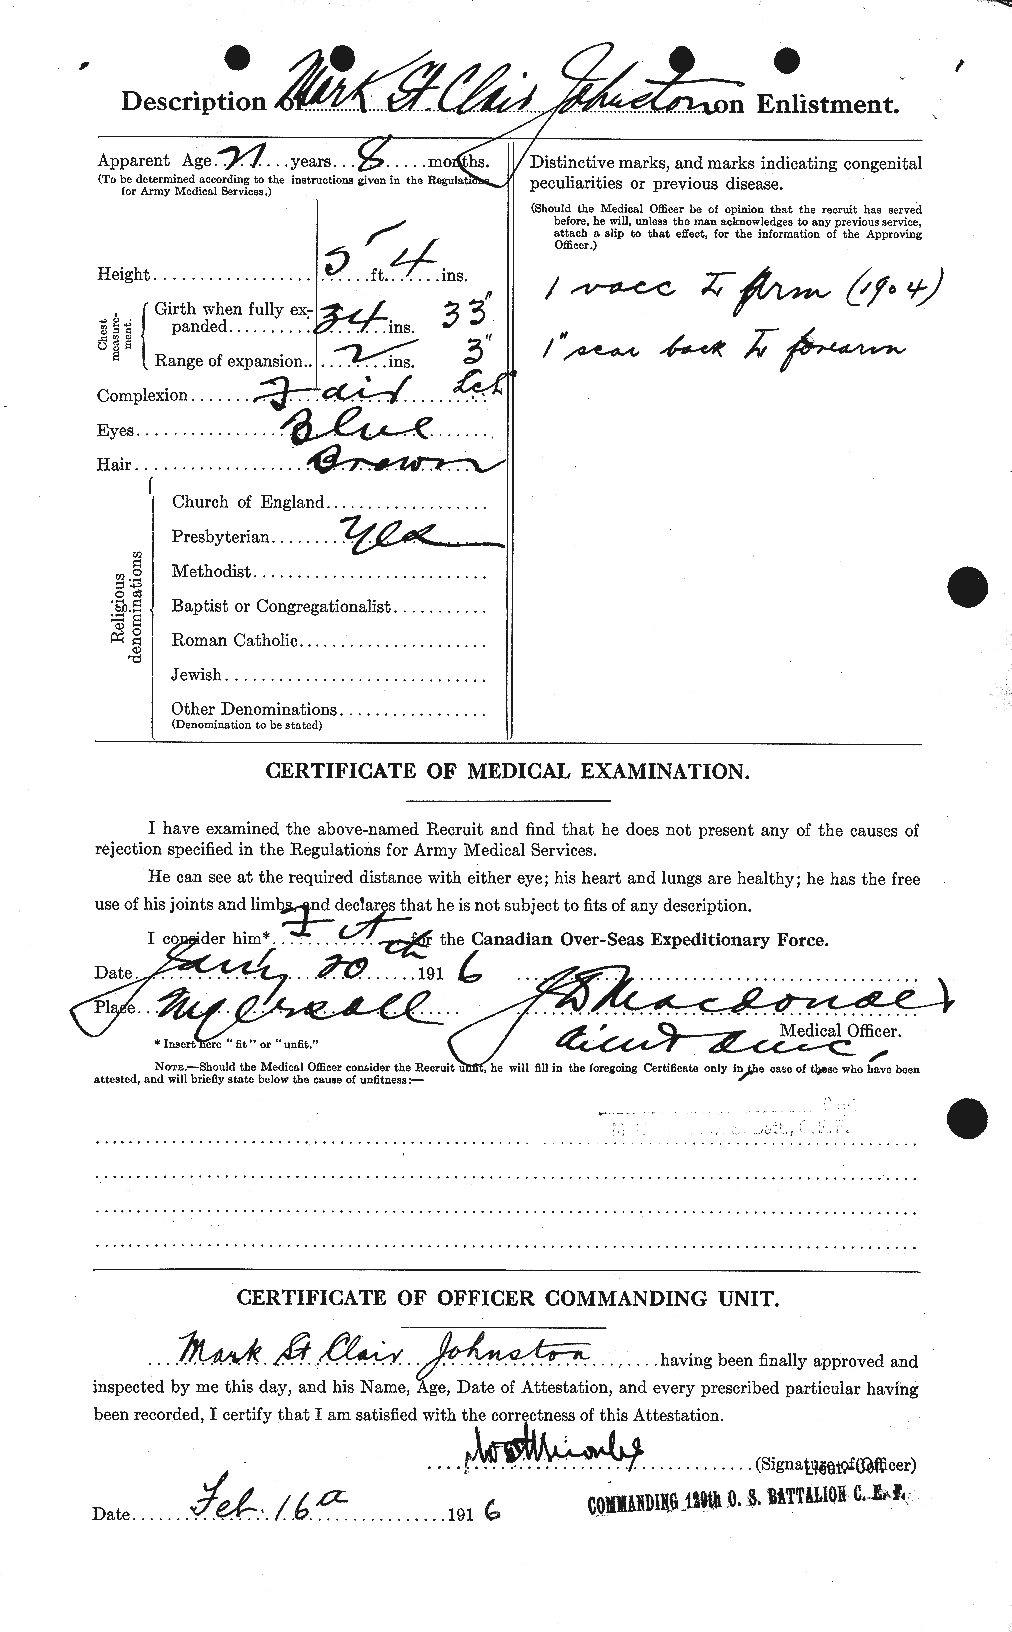 Personnel Records of the First World War - CEF 422970b